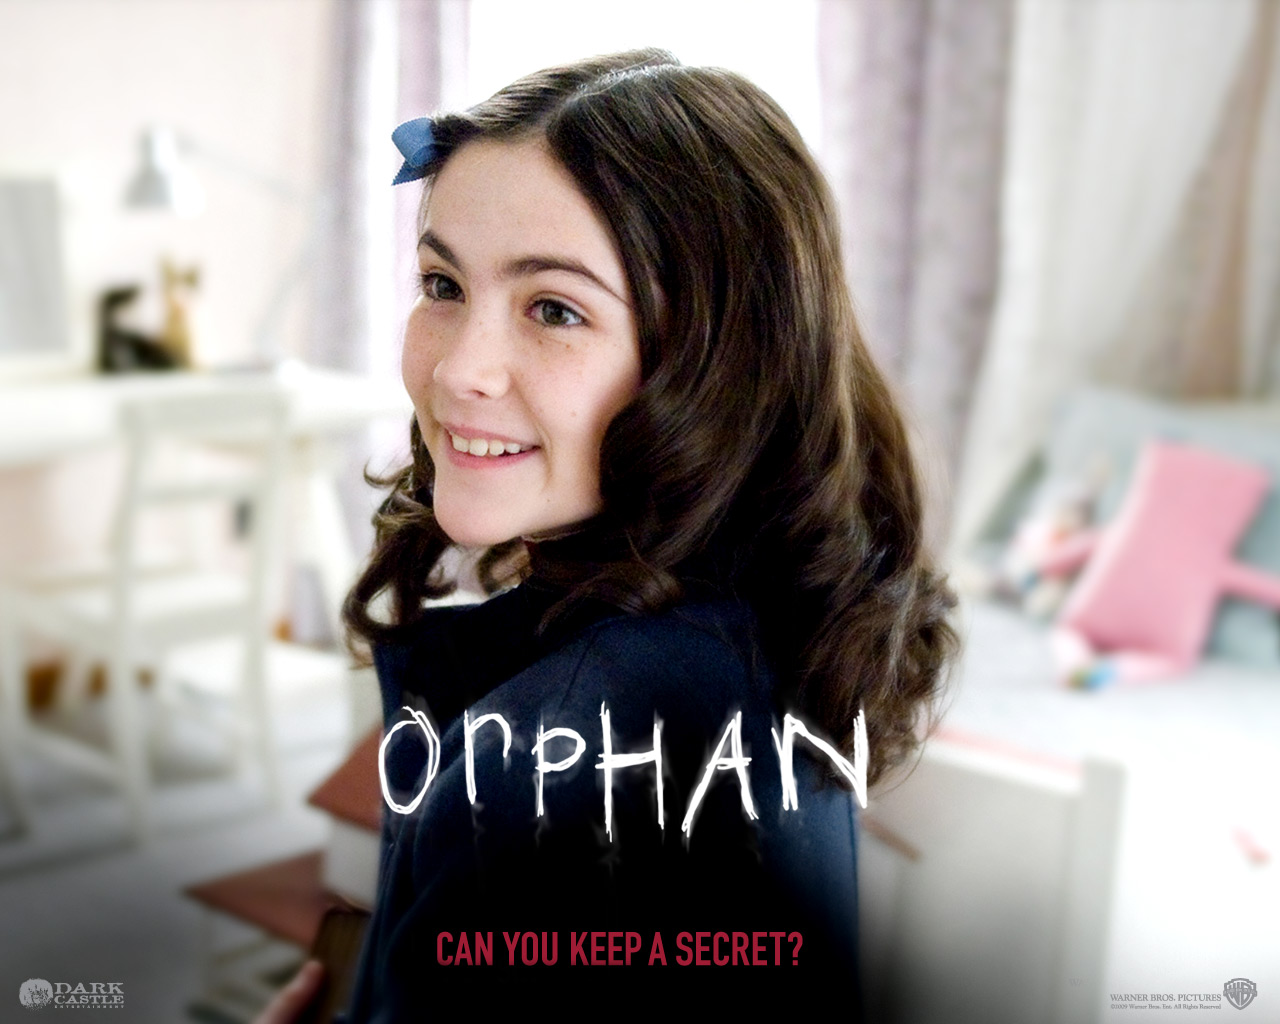 Images of Orphan | 1280x1024